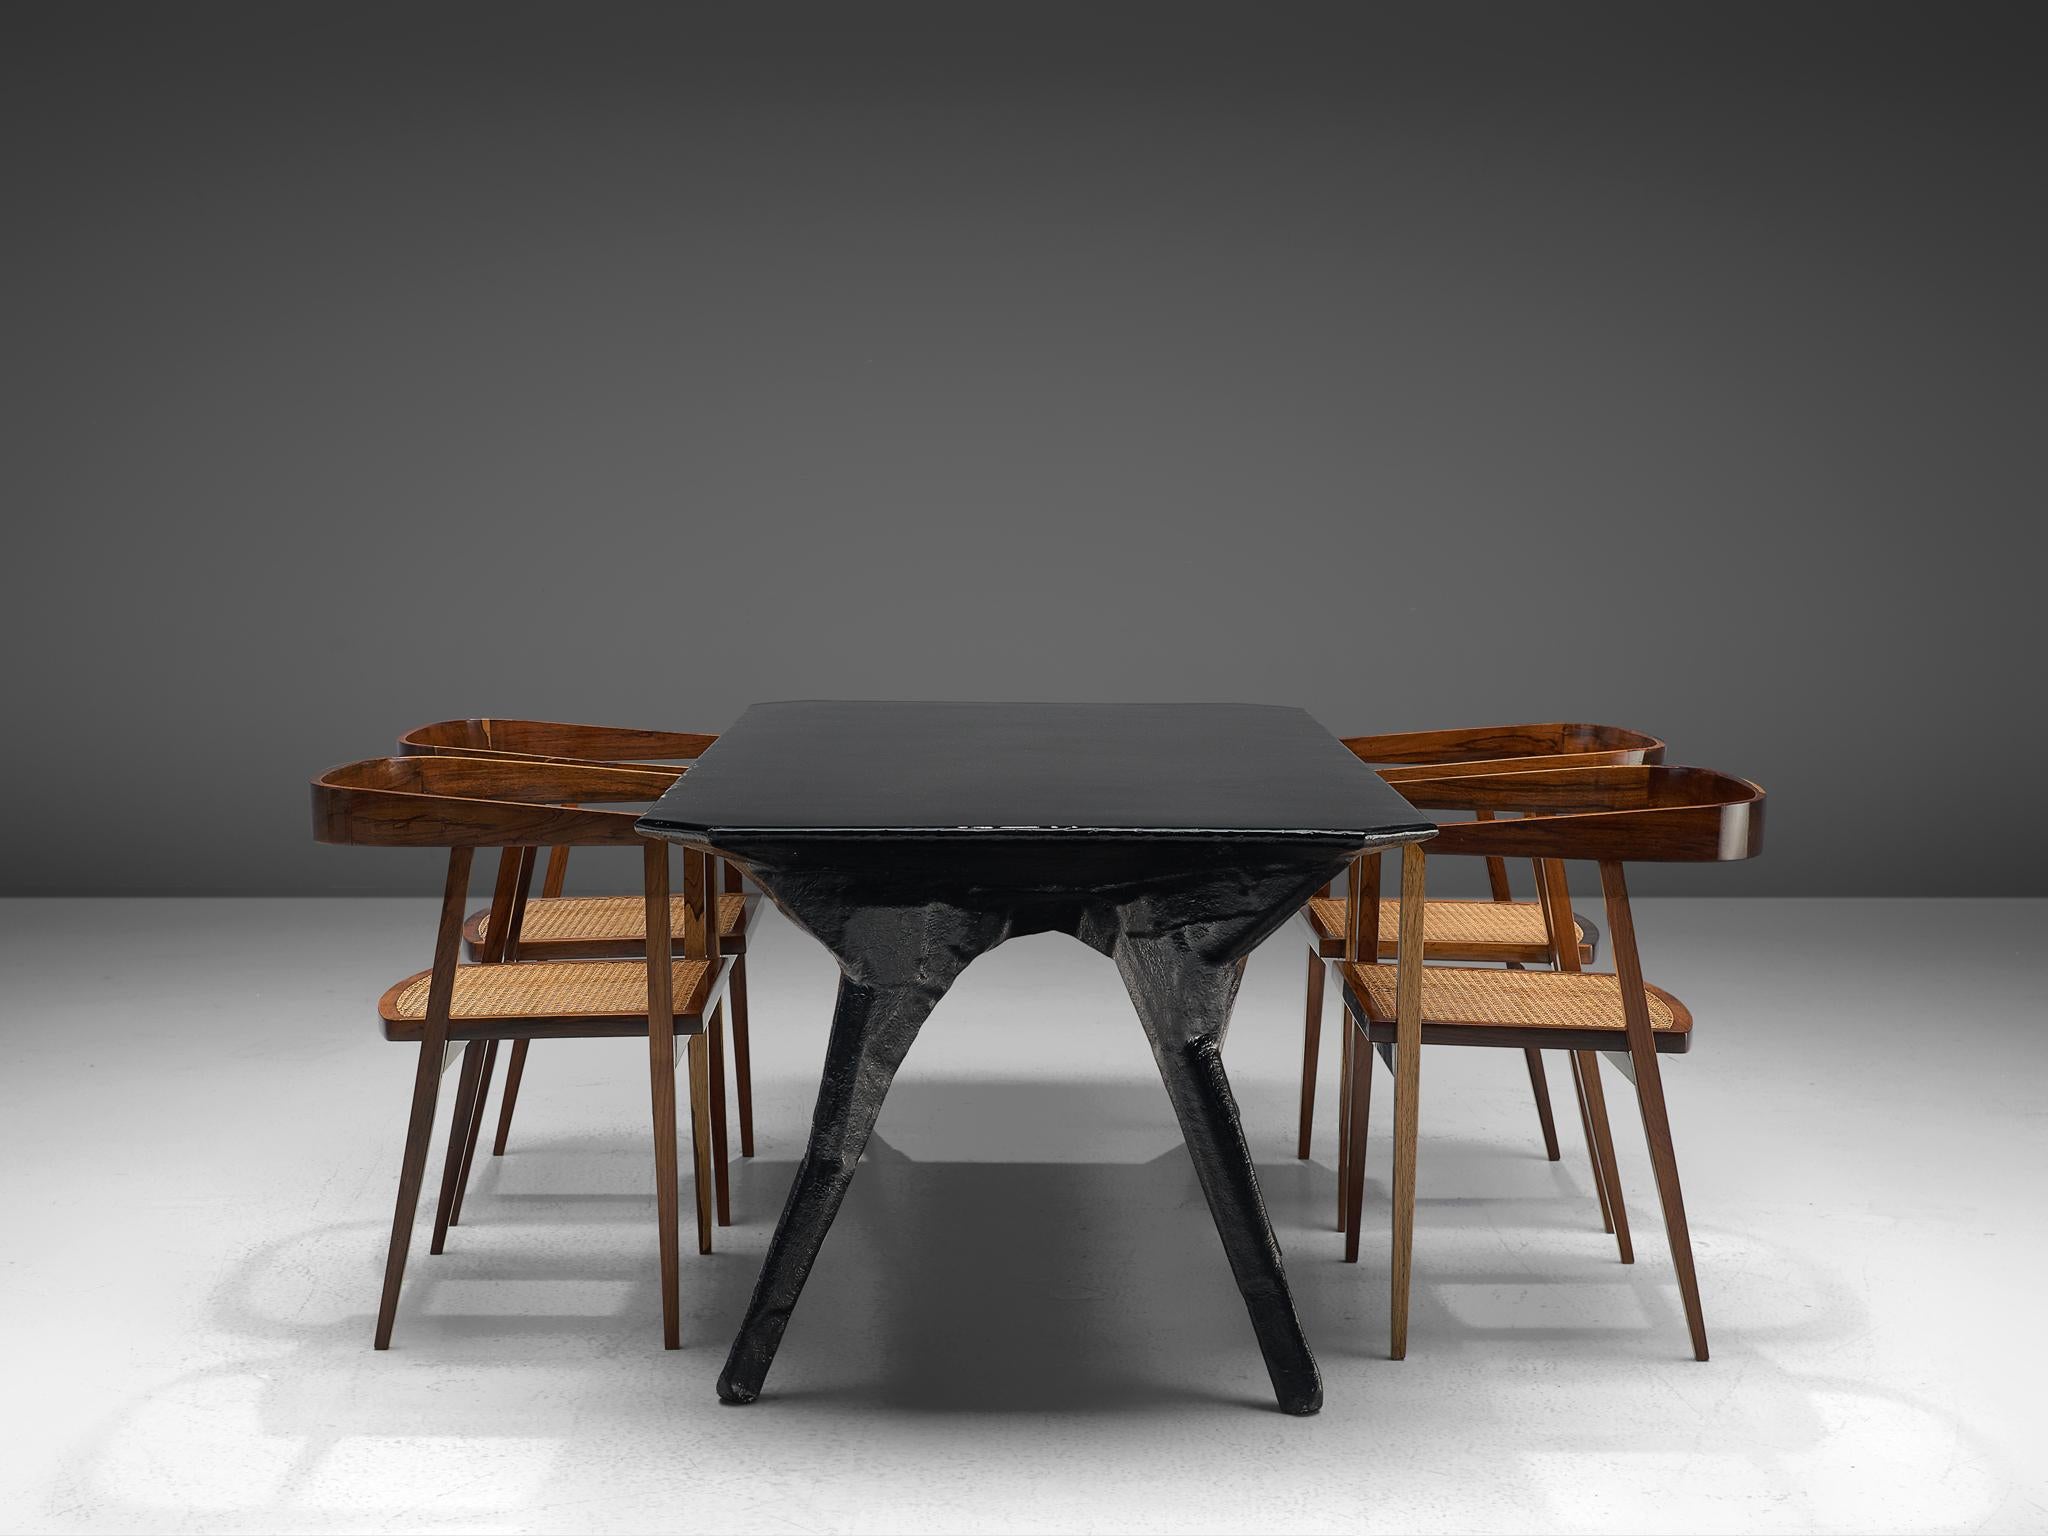 El Ultimo Grito Dining Table with Sculptural Legs 1